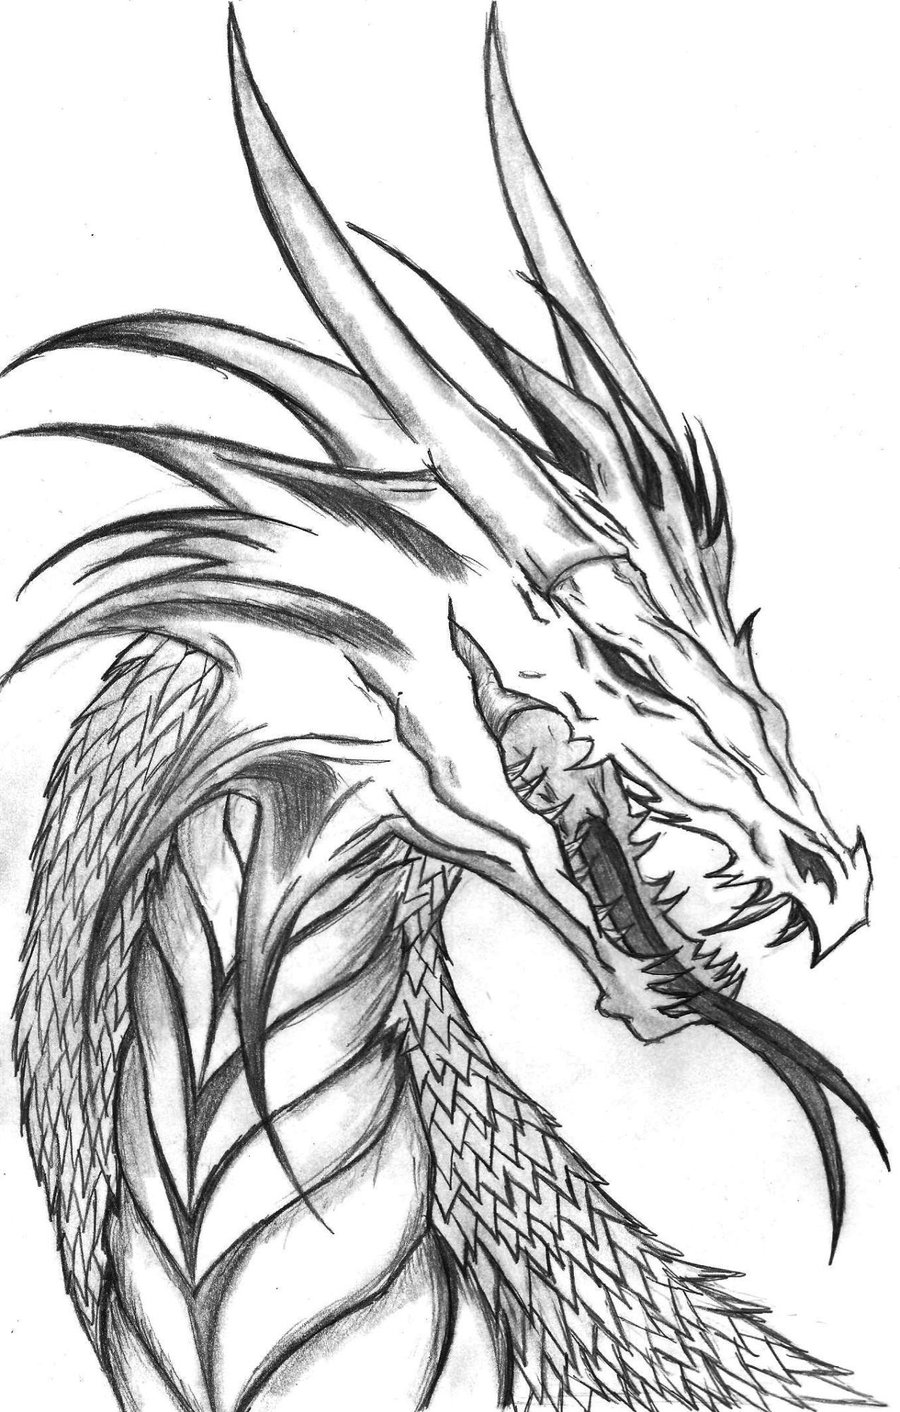 Download Free Printable Dragon Coloring Pages For Kids